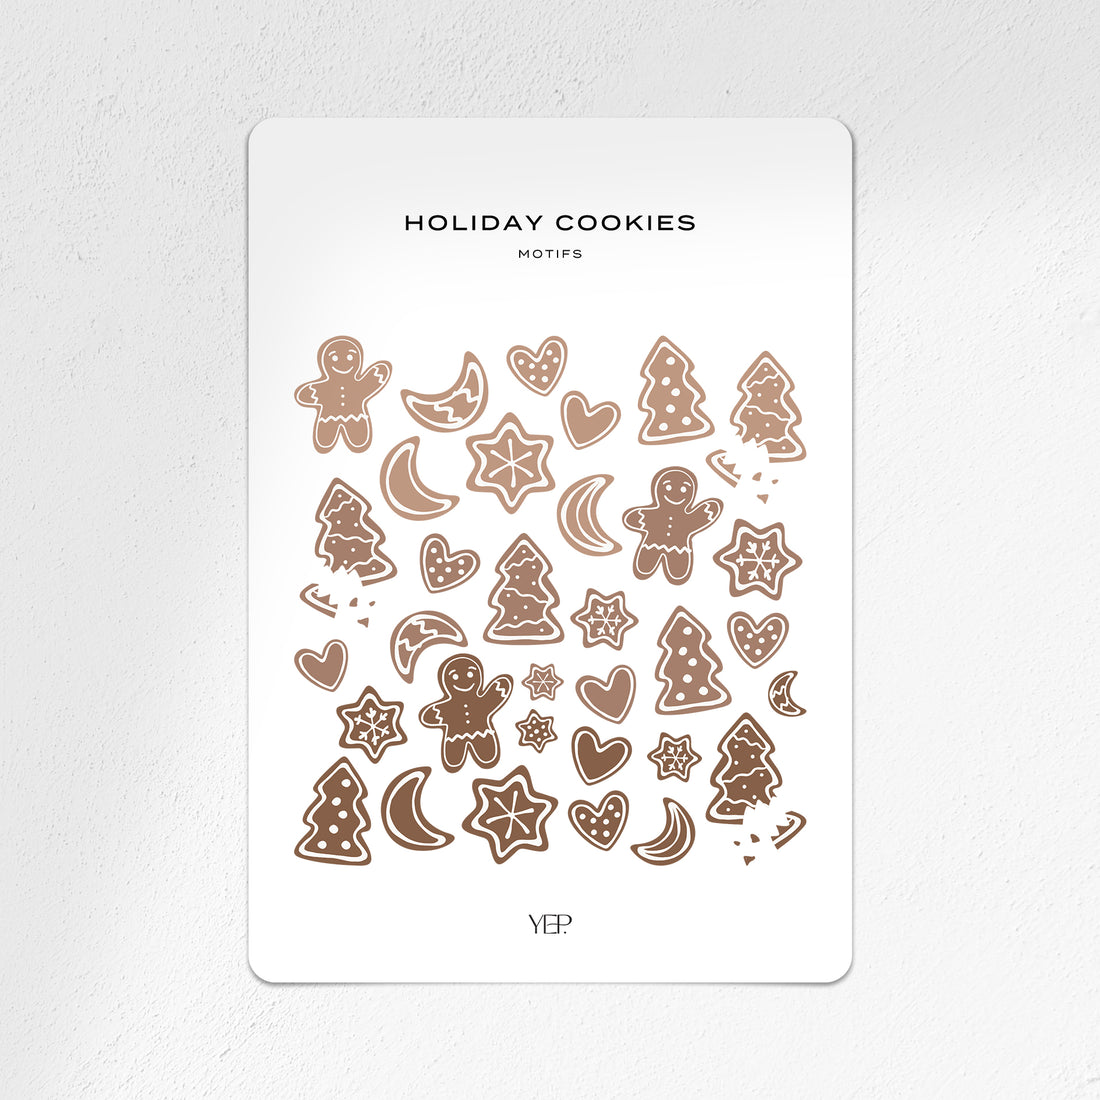 Holiday Cookies Motifs